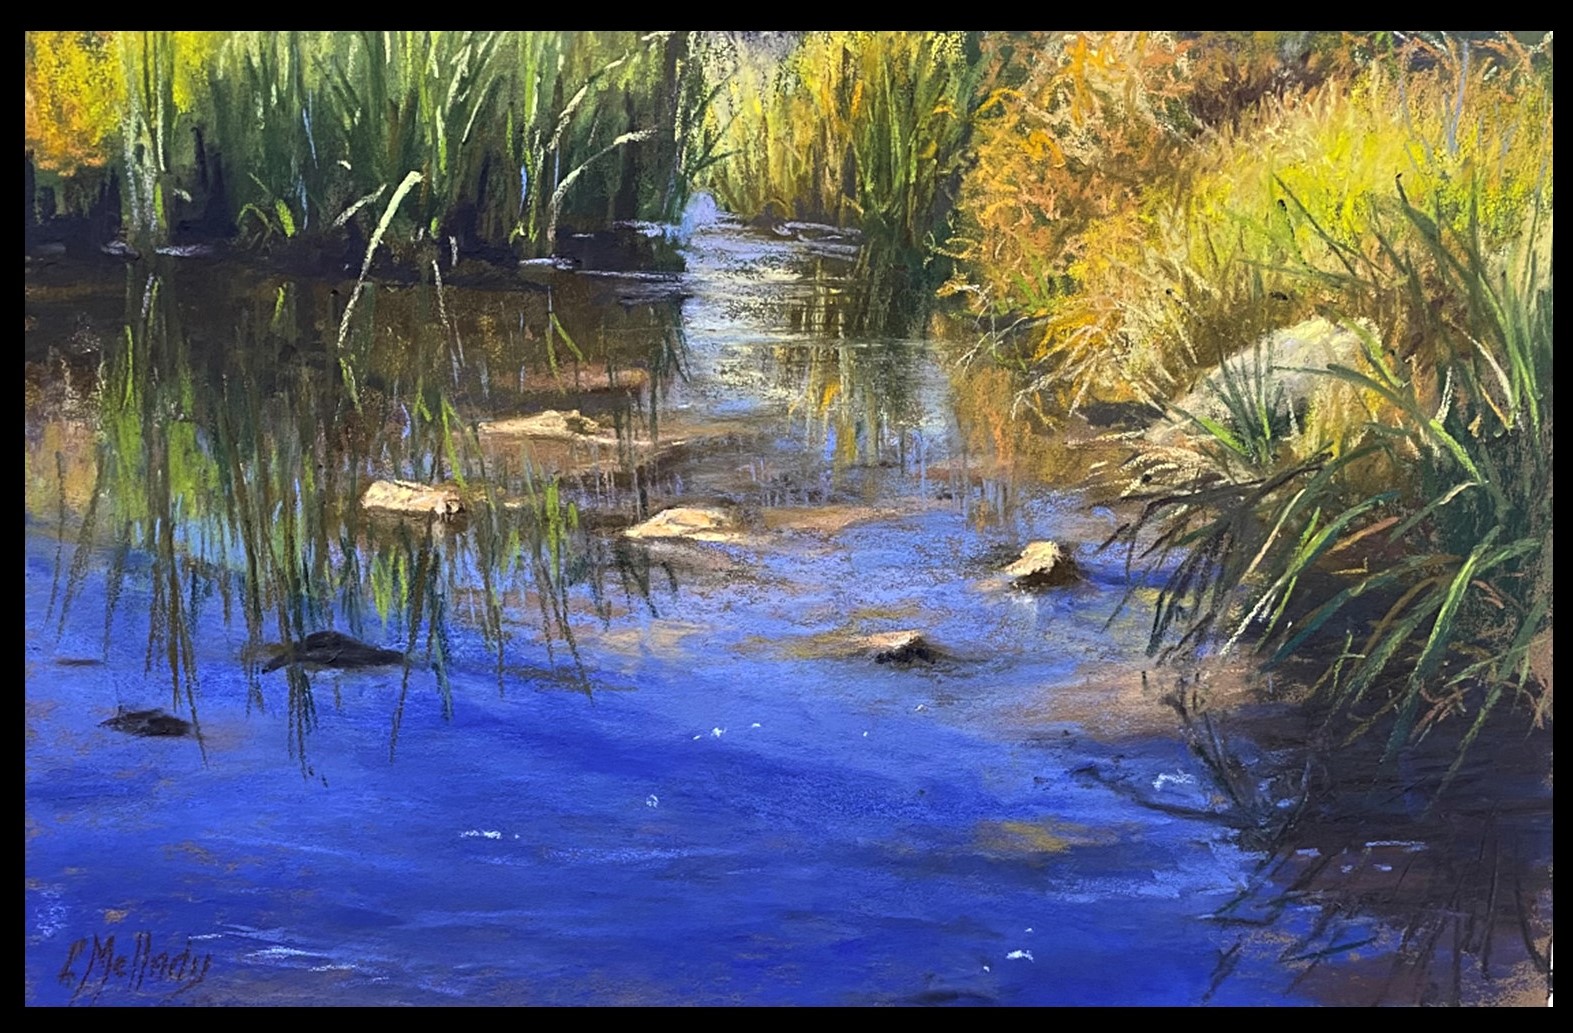 A pastel painting where sunlight and reflections play on the water